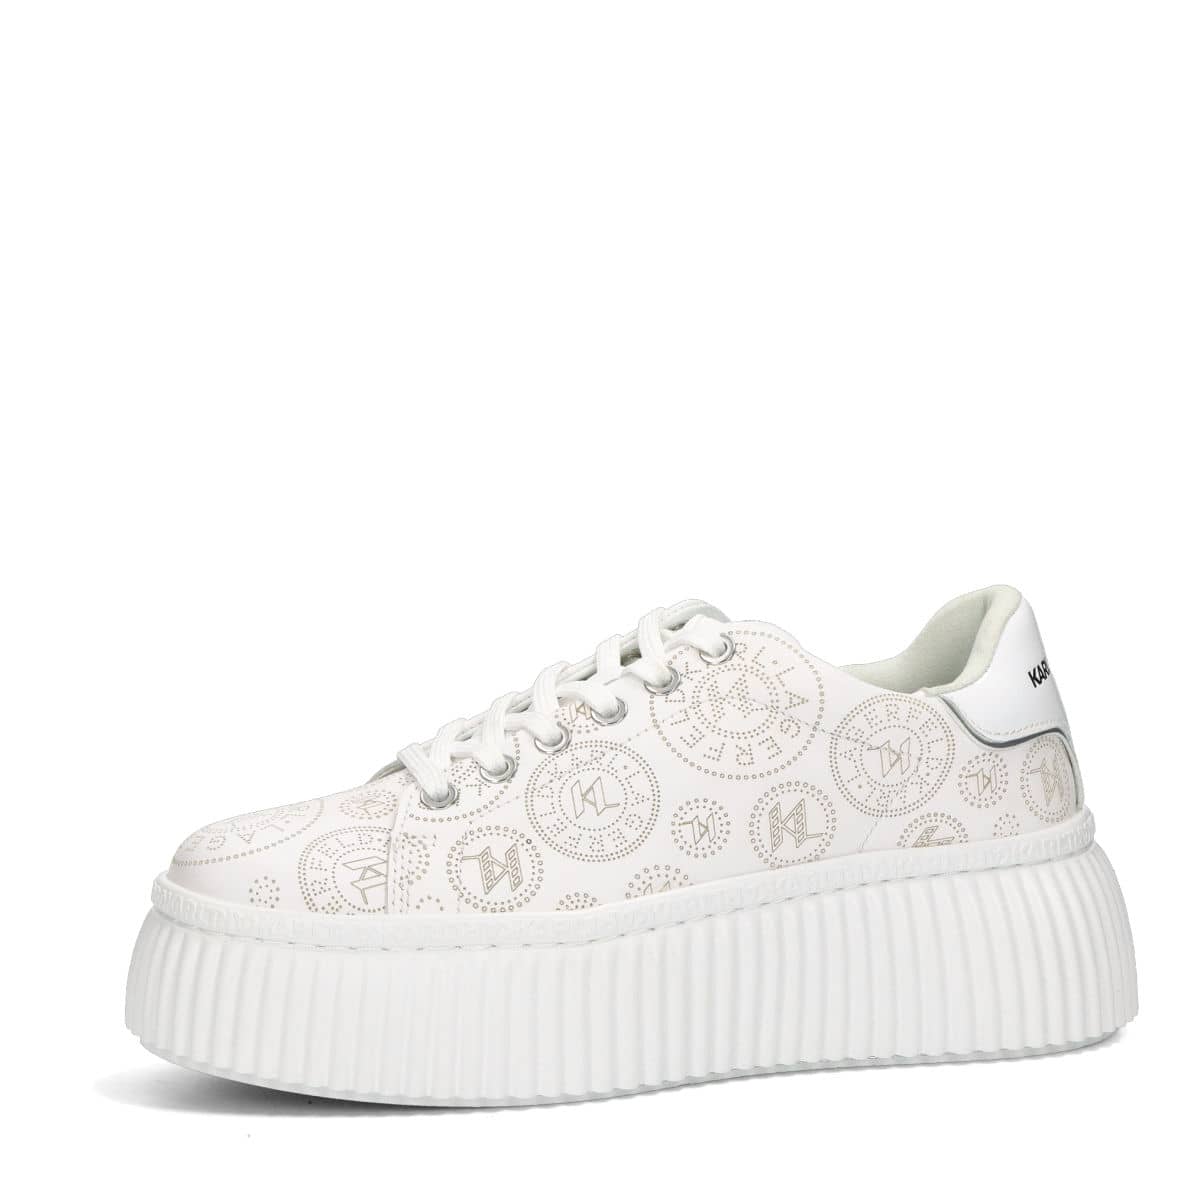 Karl Lagerfeld sneakers on a sole - white | Robel.shoes